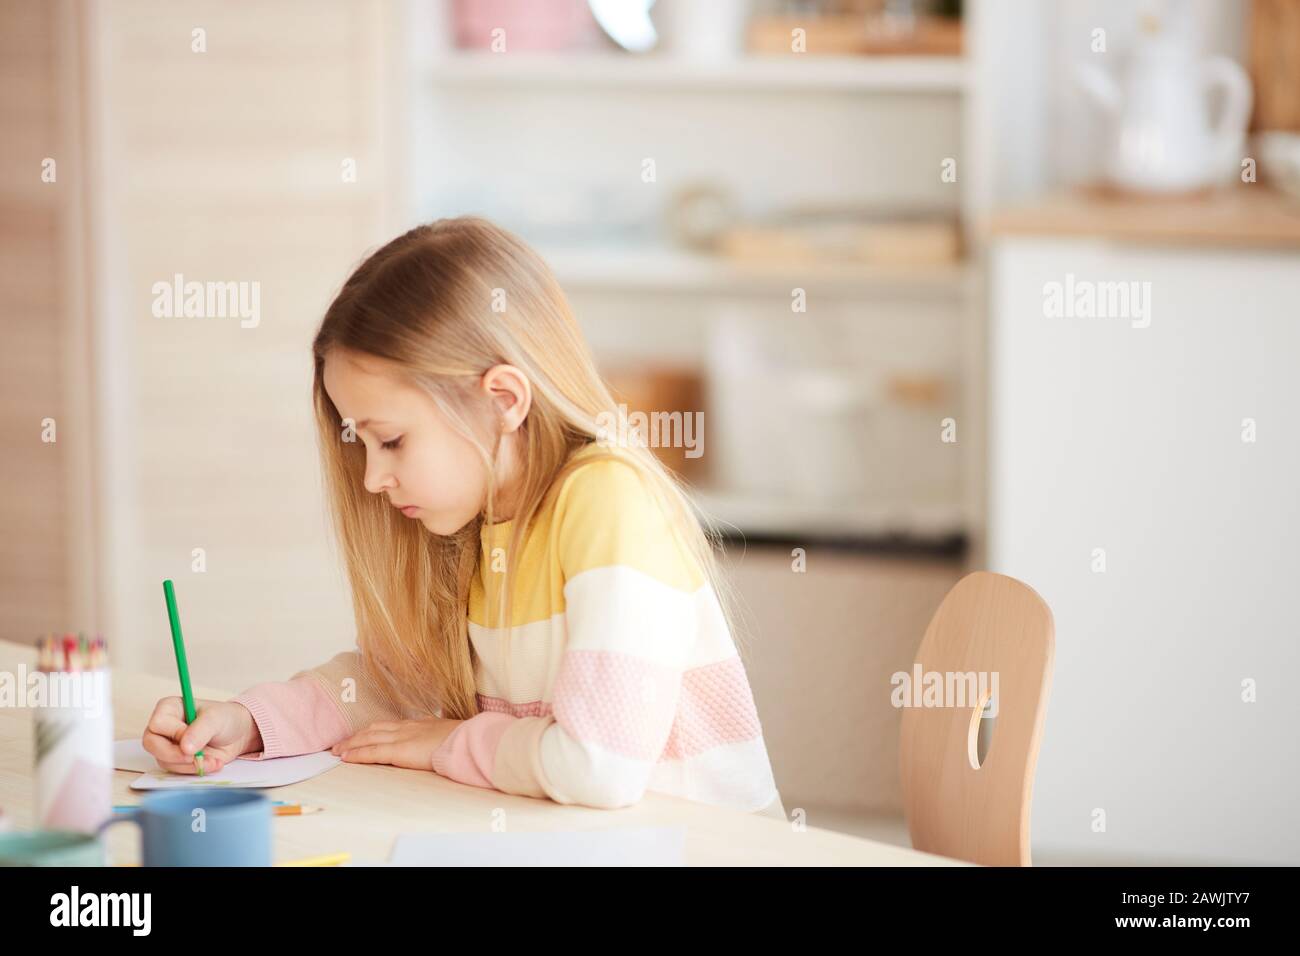 Side view portrait of cute little girl drawing pictures or doing homework while sitting at table in home interior, copy space Stock Photo